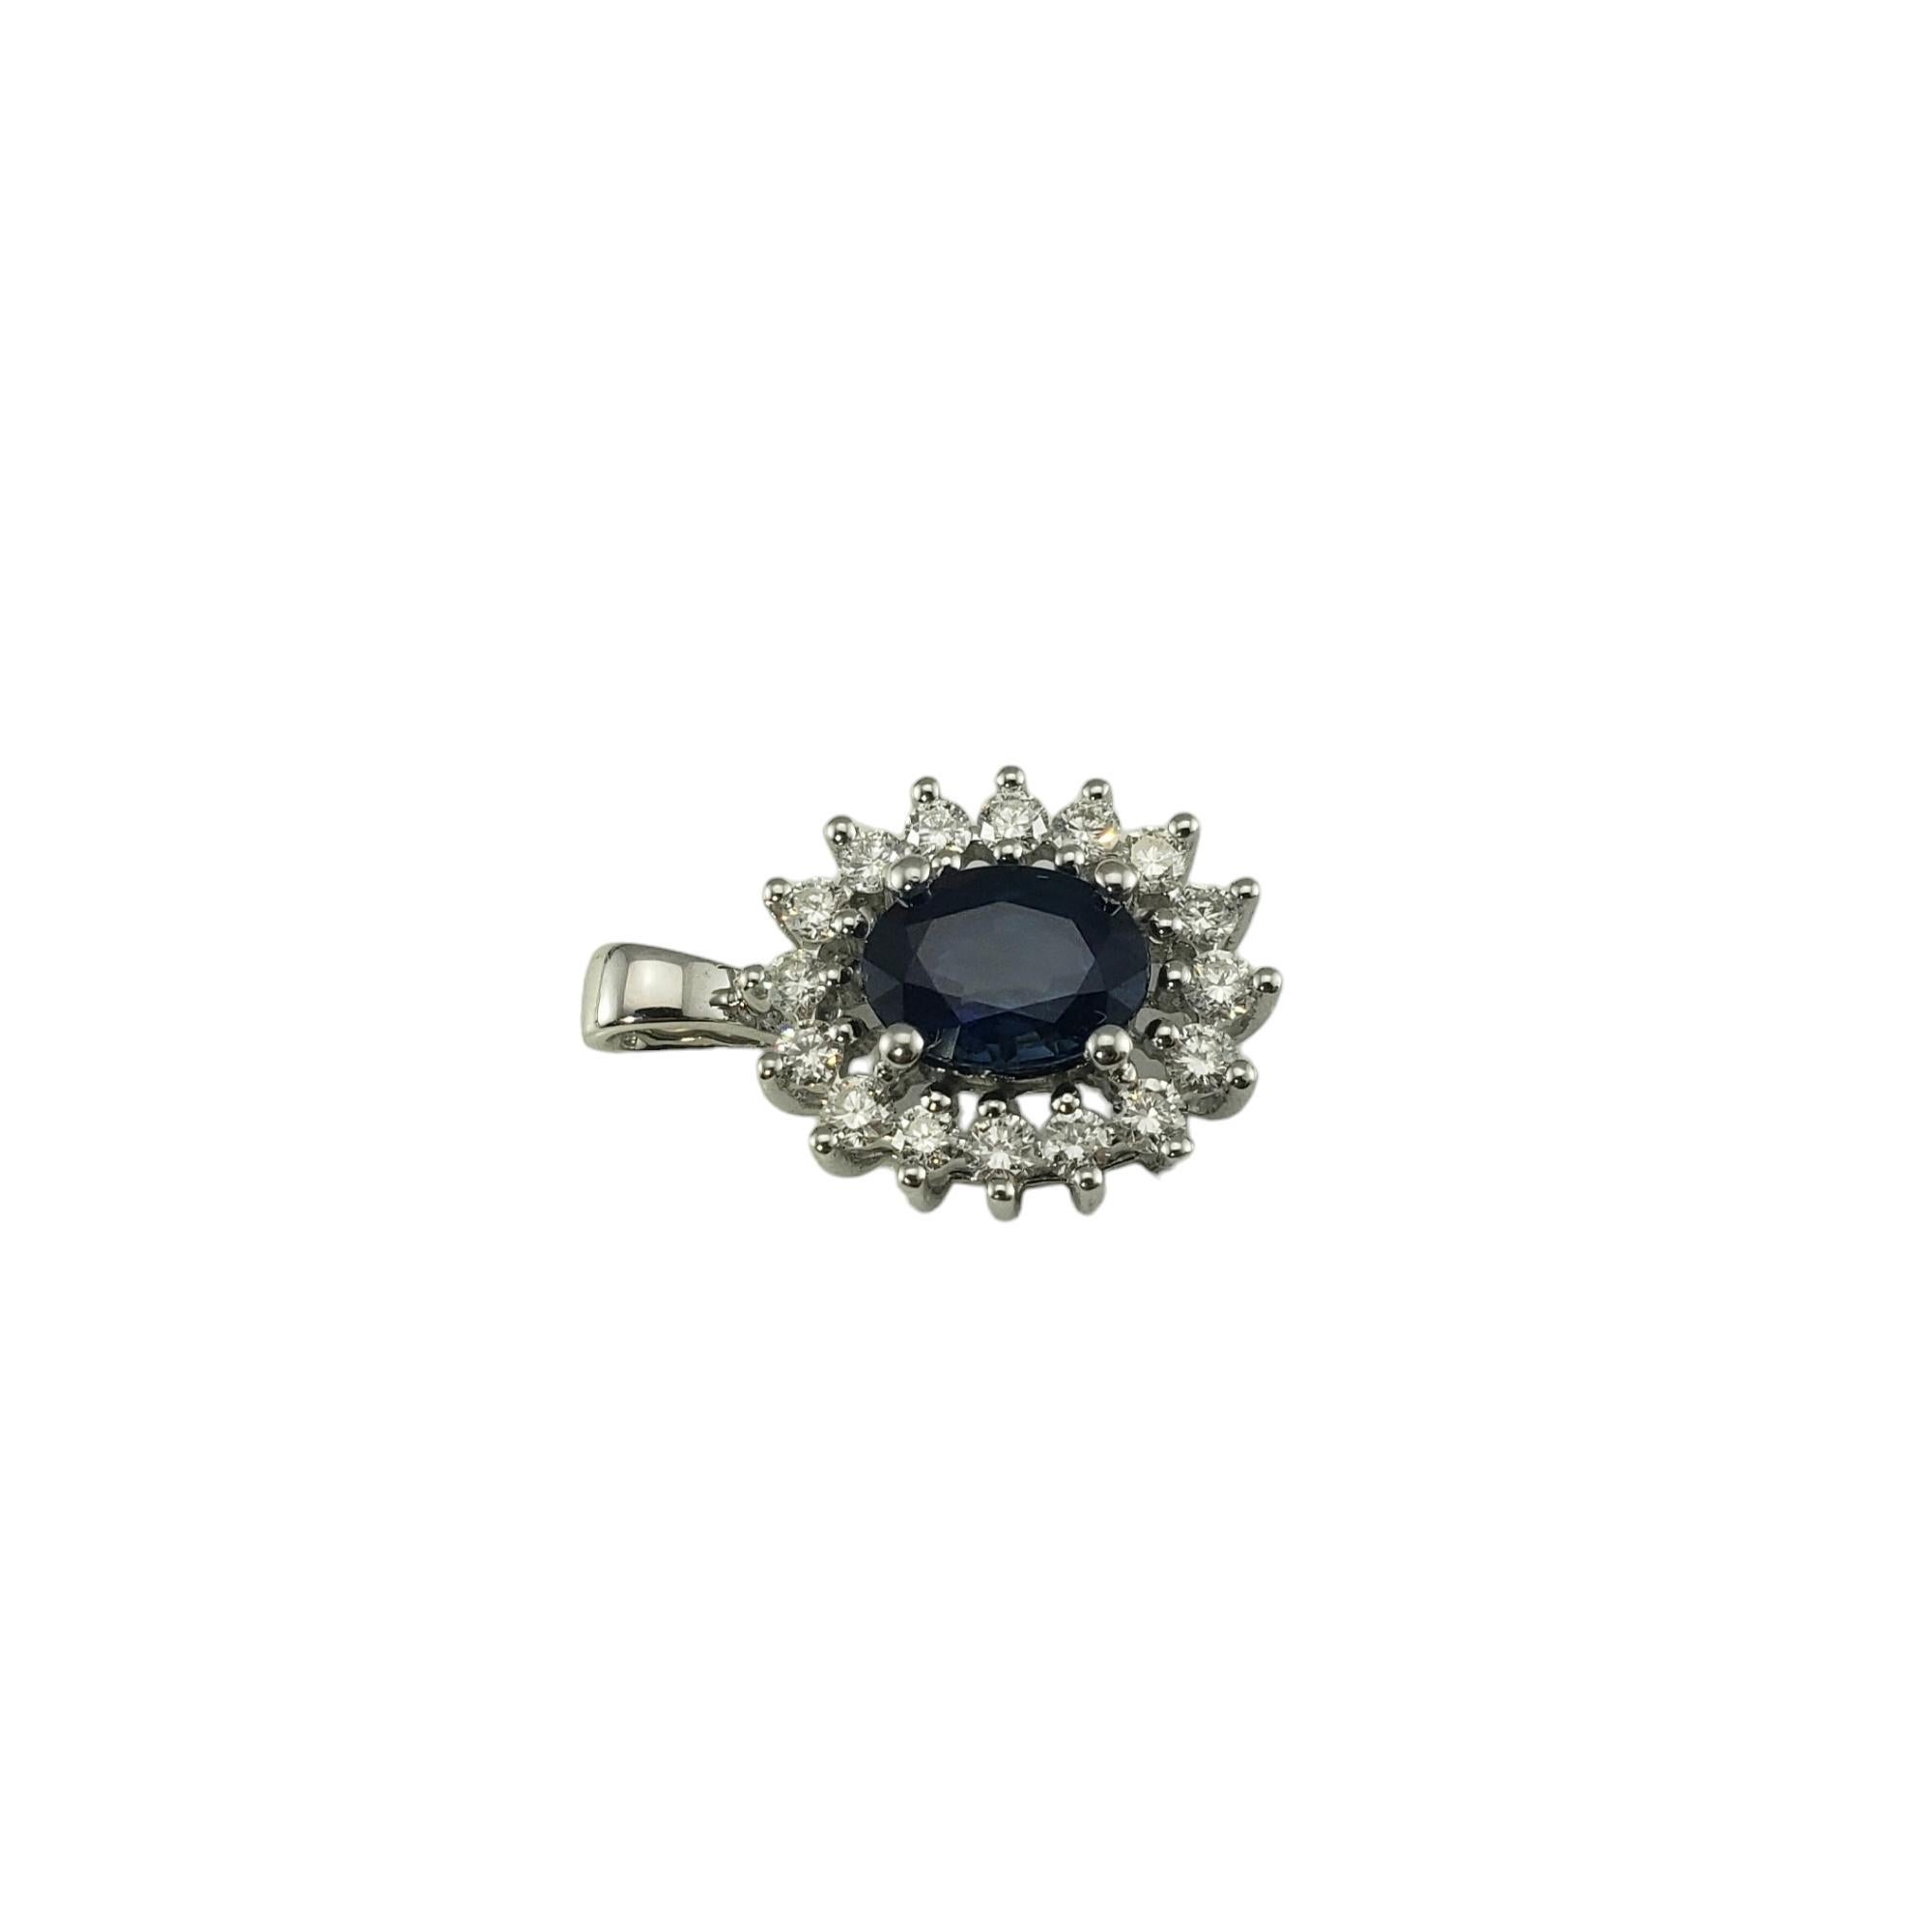 Vintage 14K White Gold Sapphire and Diamond Pendant Certified-

This stunning pendant features one oval sapphire (8 mm x 6 mm) and 16 round brilliant cut diamonds set in classic 14K white gold. 

Sapphire weight: 1.61 ct.

Total diamond weight: .50